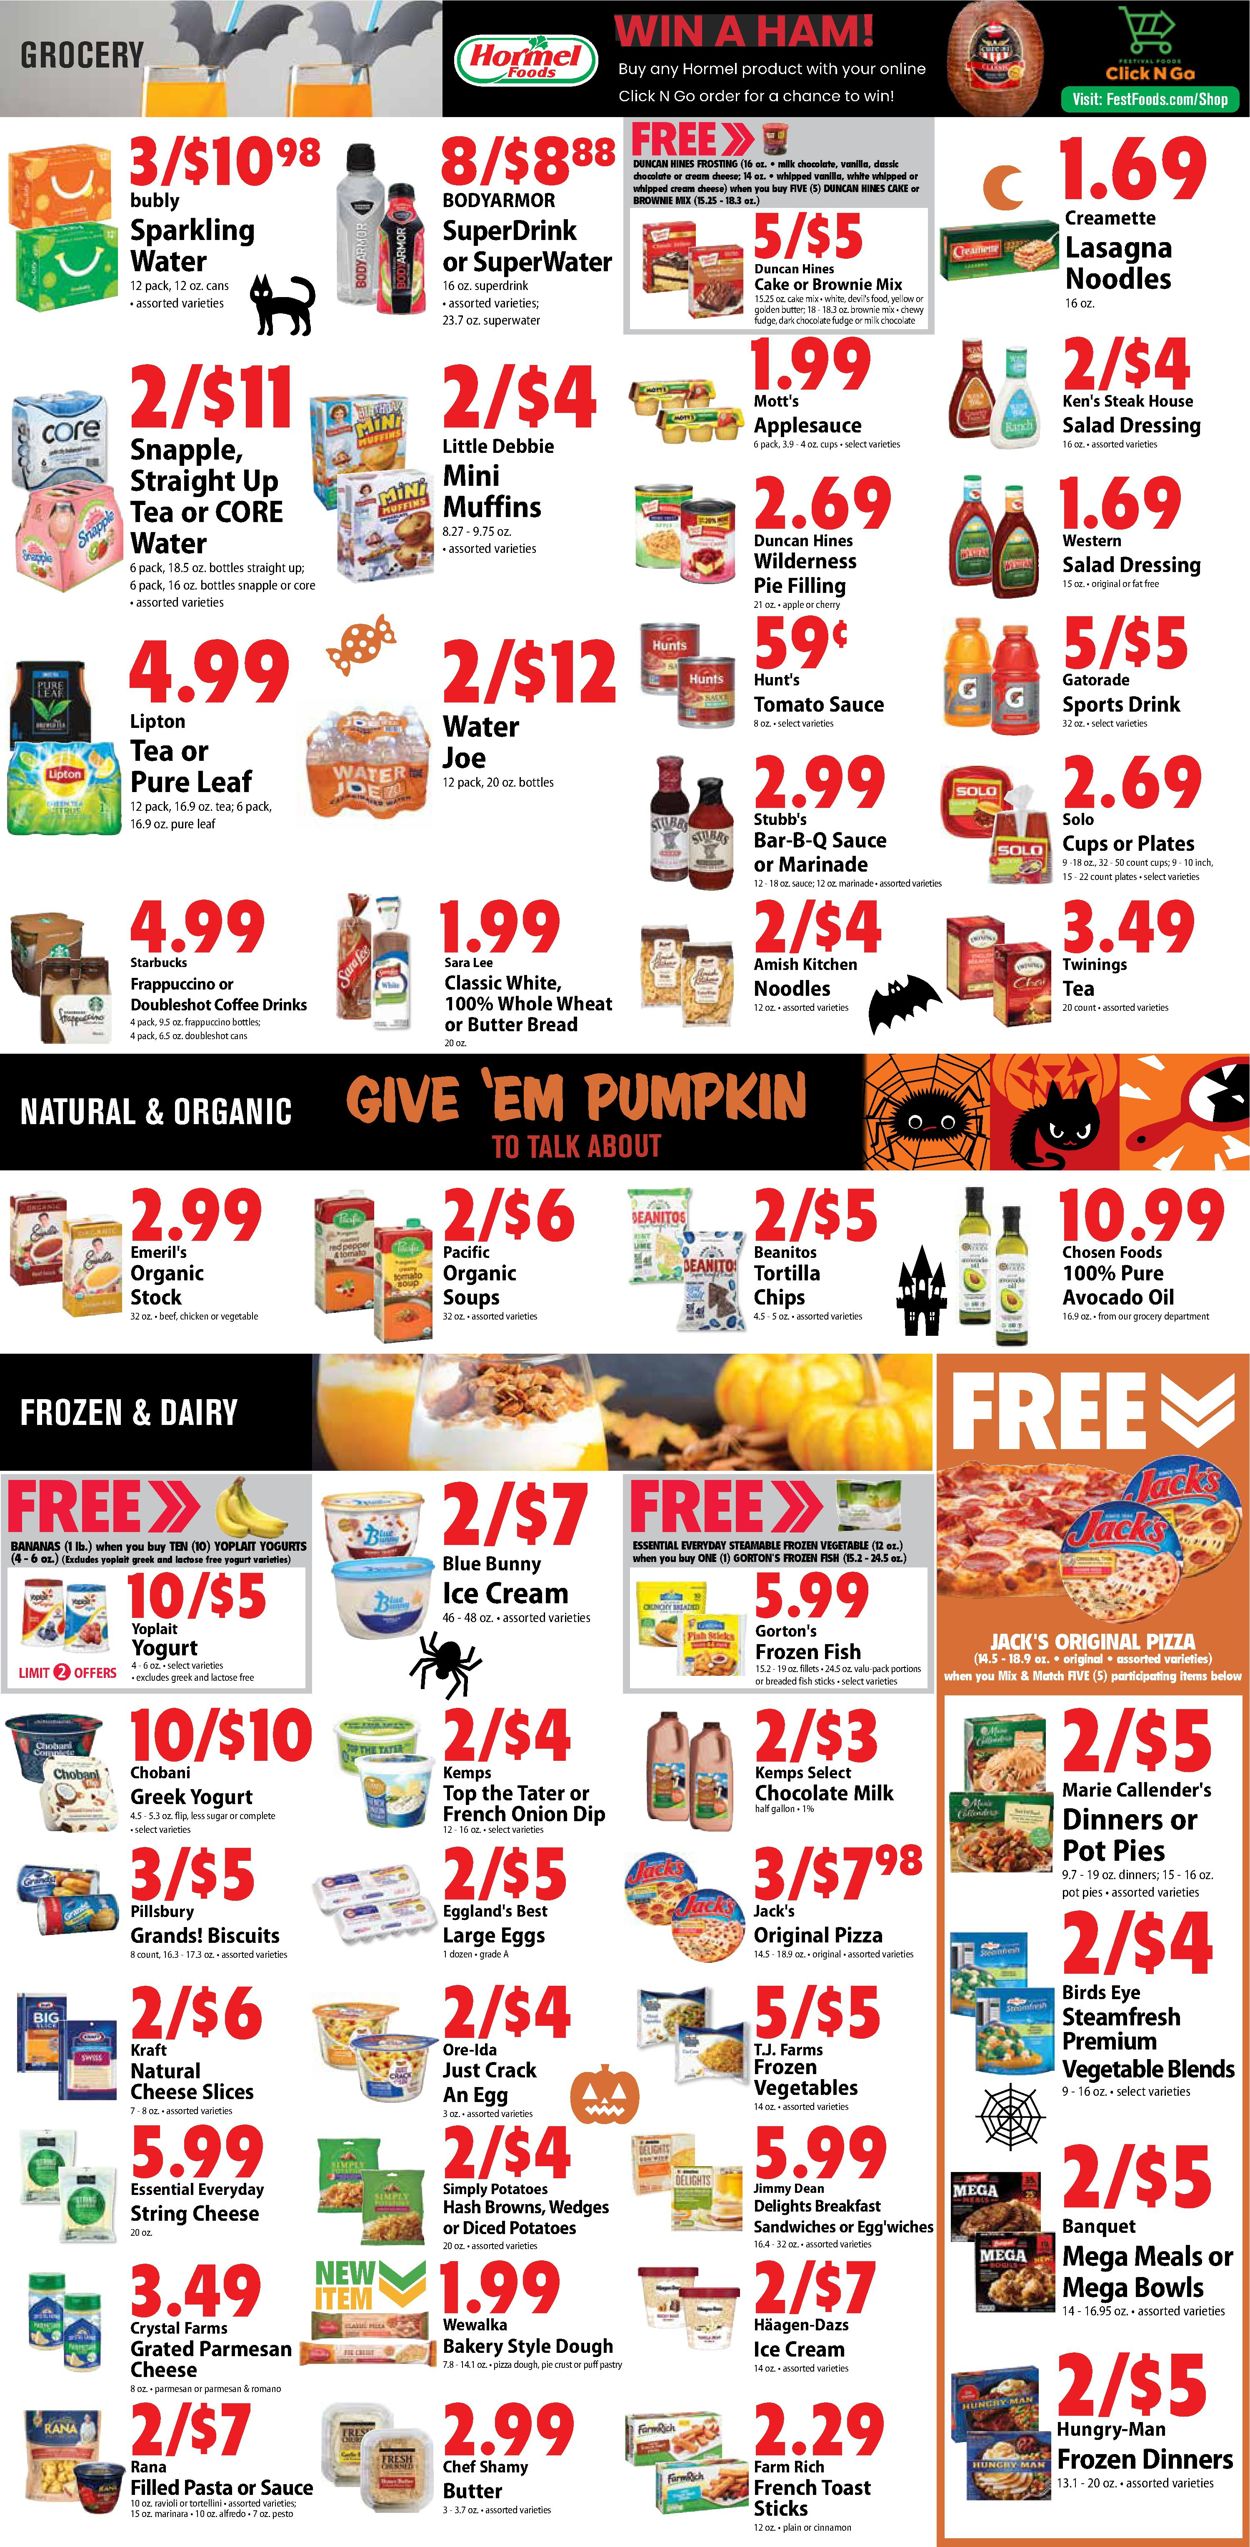 Festival Foods Current weekly ad 10/28 11/03/2020 [5]